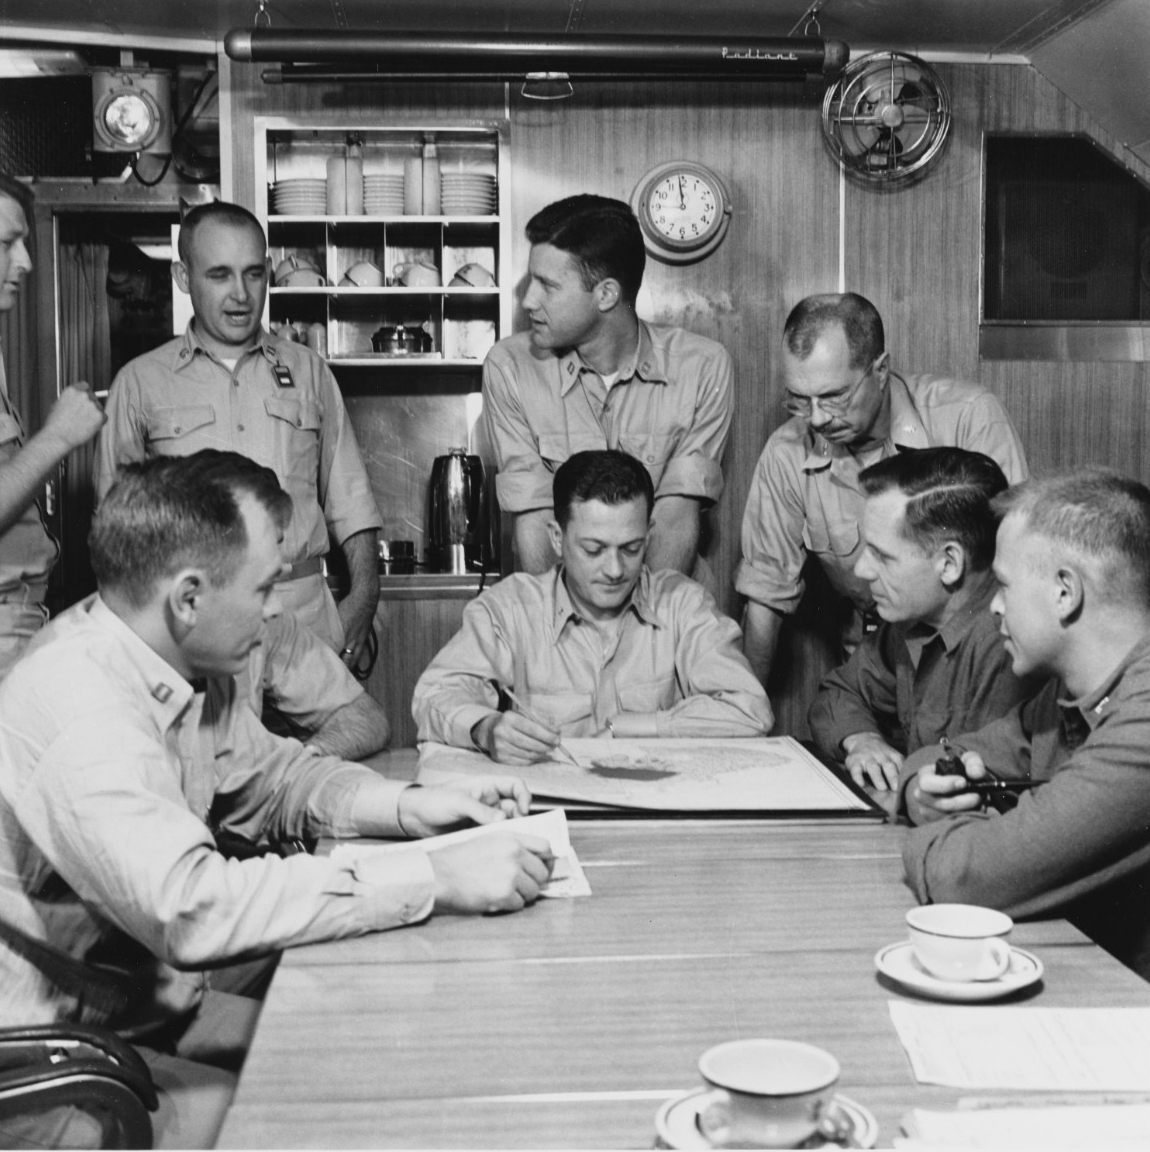 Commander William R. Anderson, commanding officer of USS Nautilus (SSN-571), briefed the ship's officers